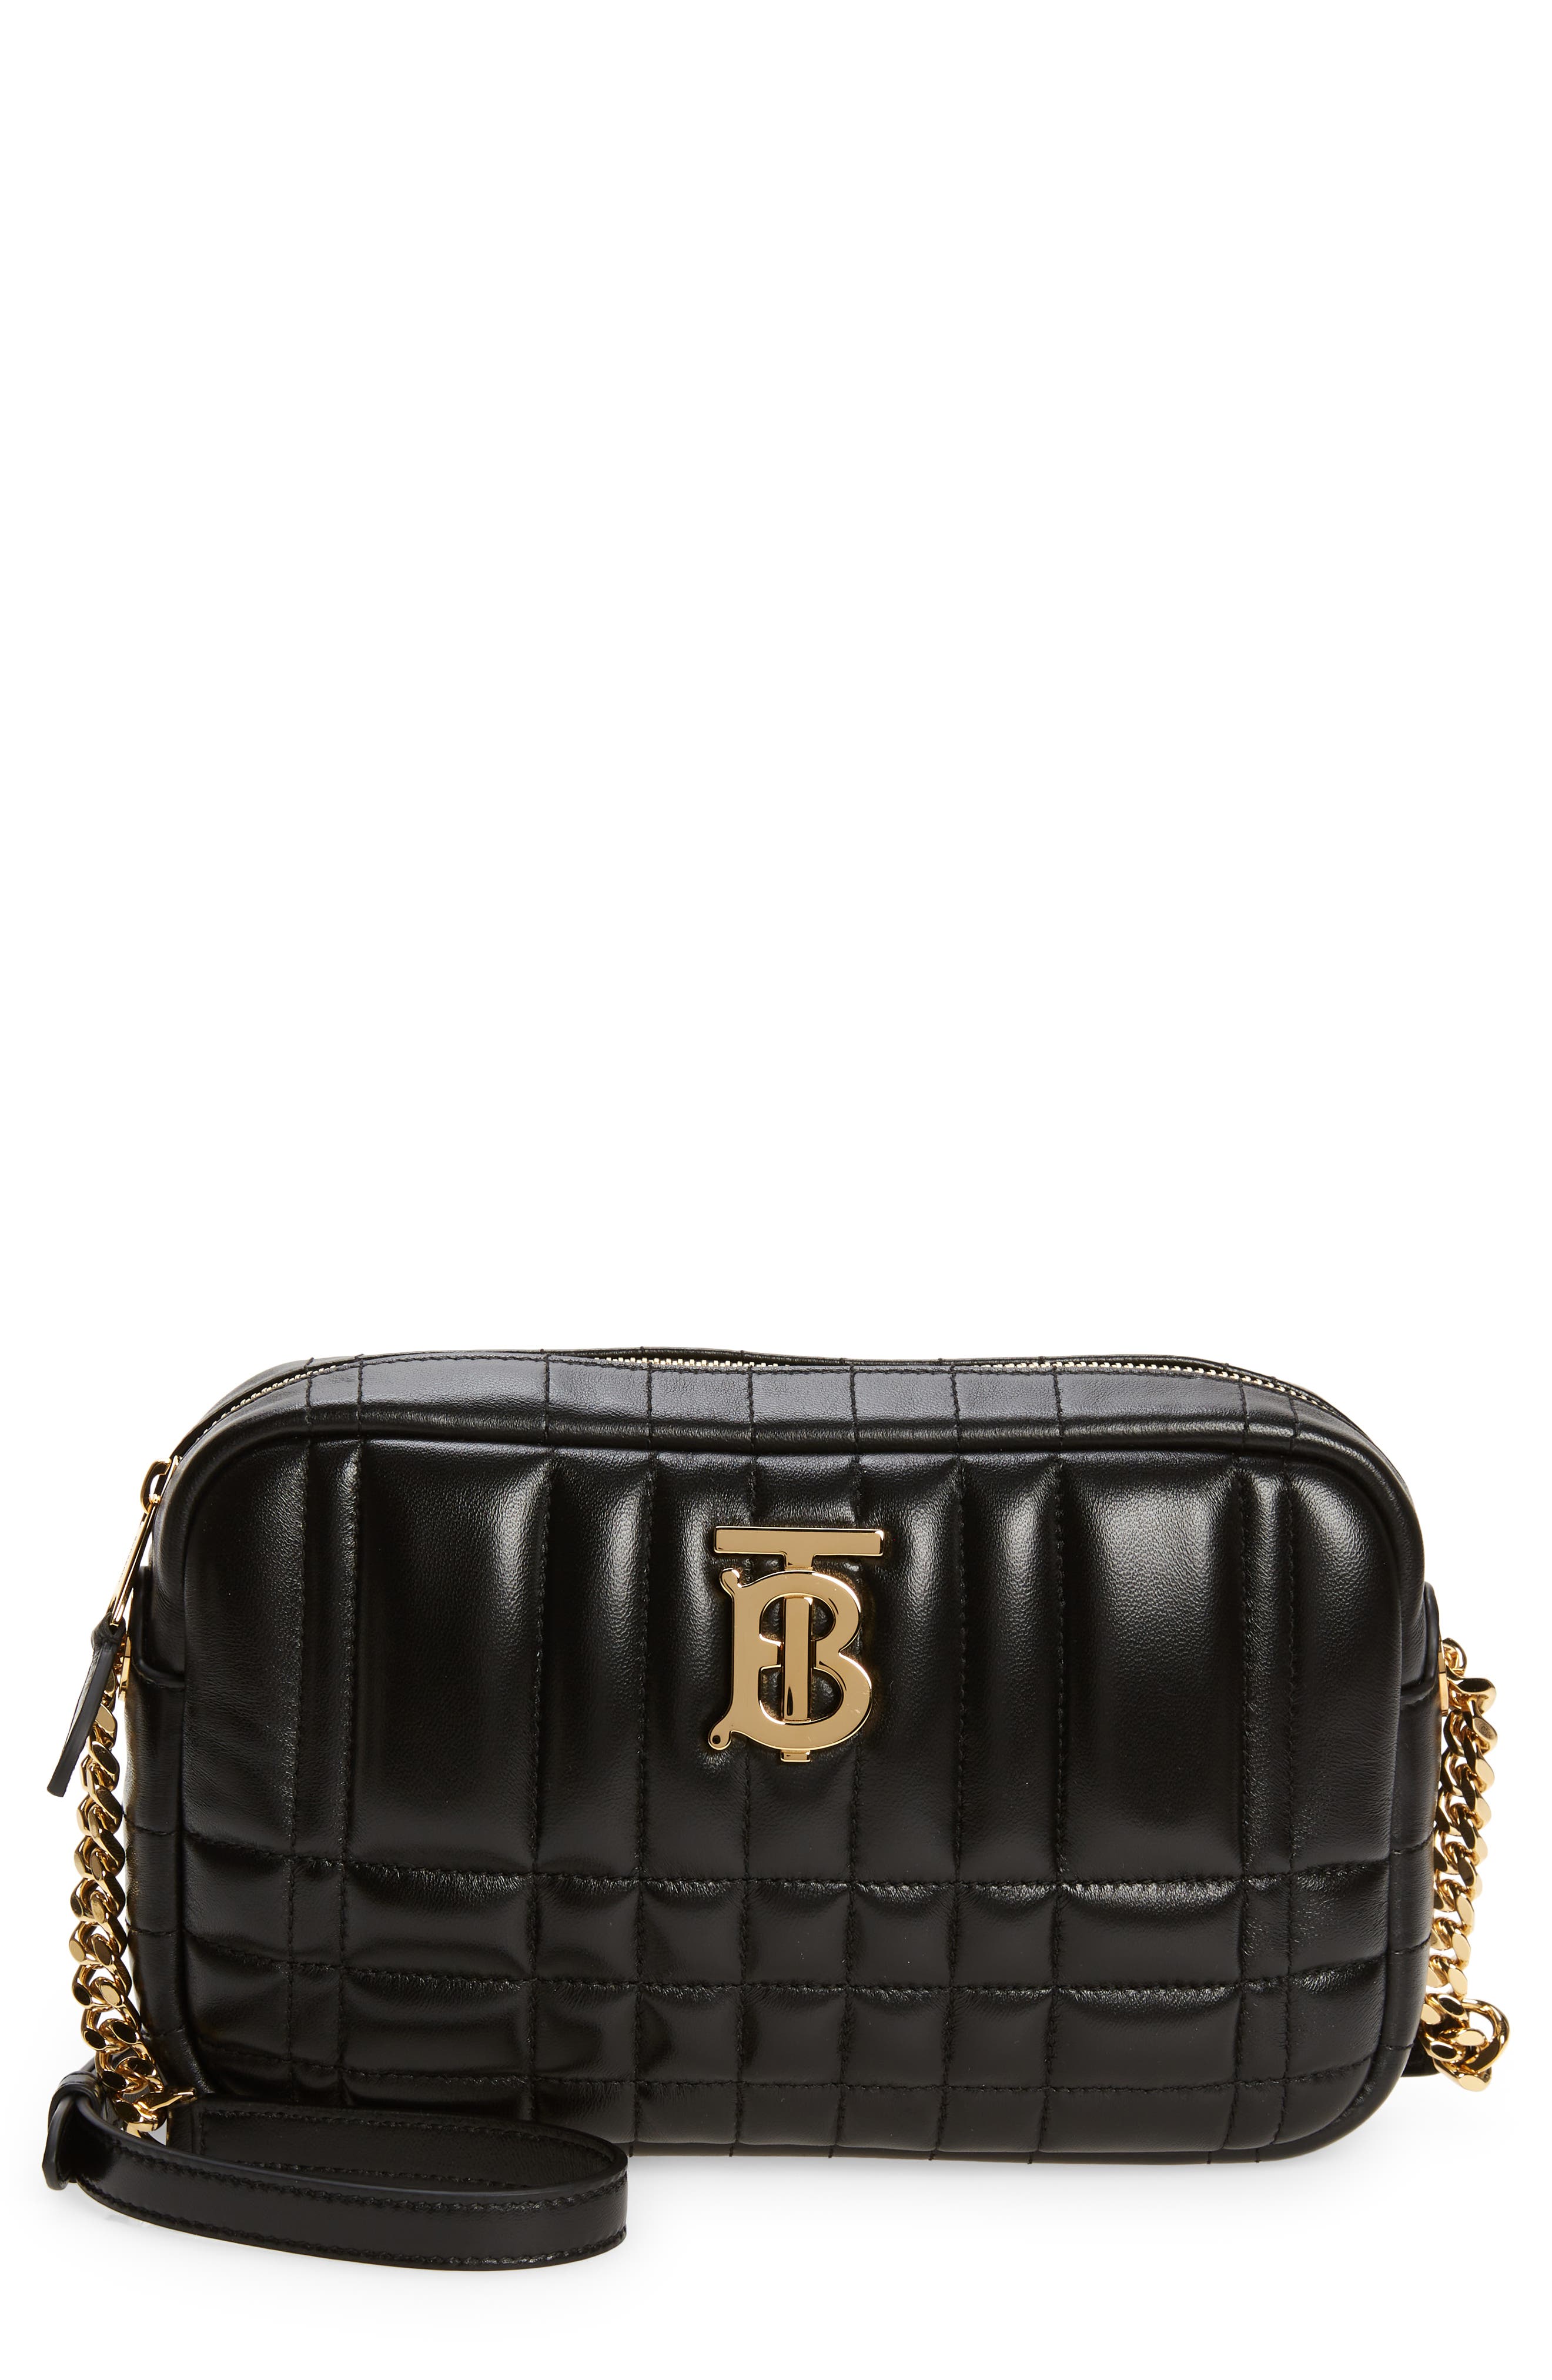 Burberry Small Lola Check Quilted Leather Camera Bag in Black